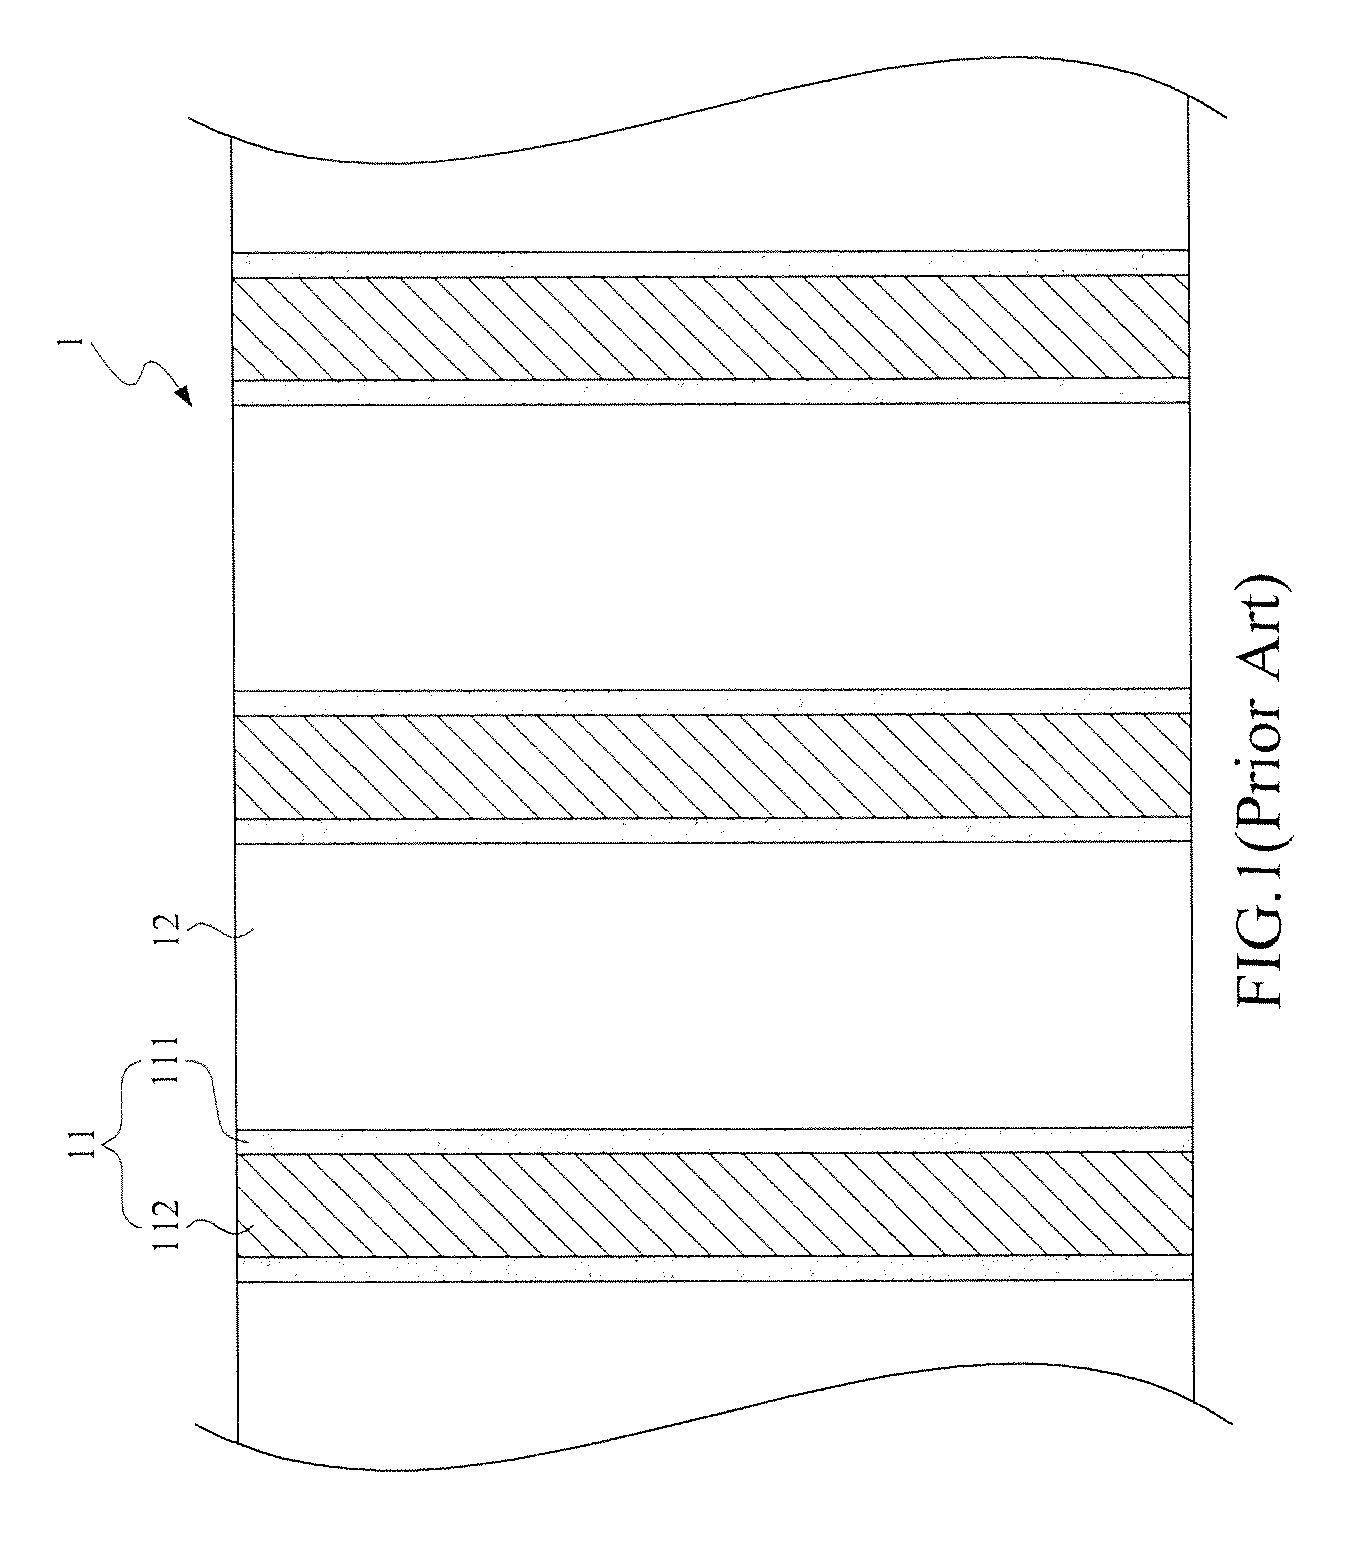 Semiconductor structure with dispersedly arranged active region trenches